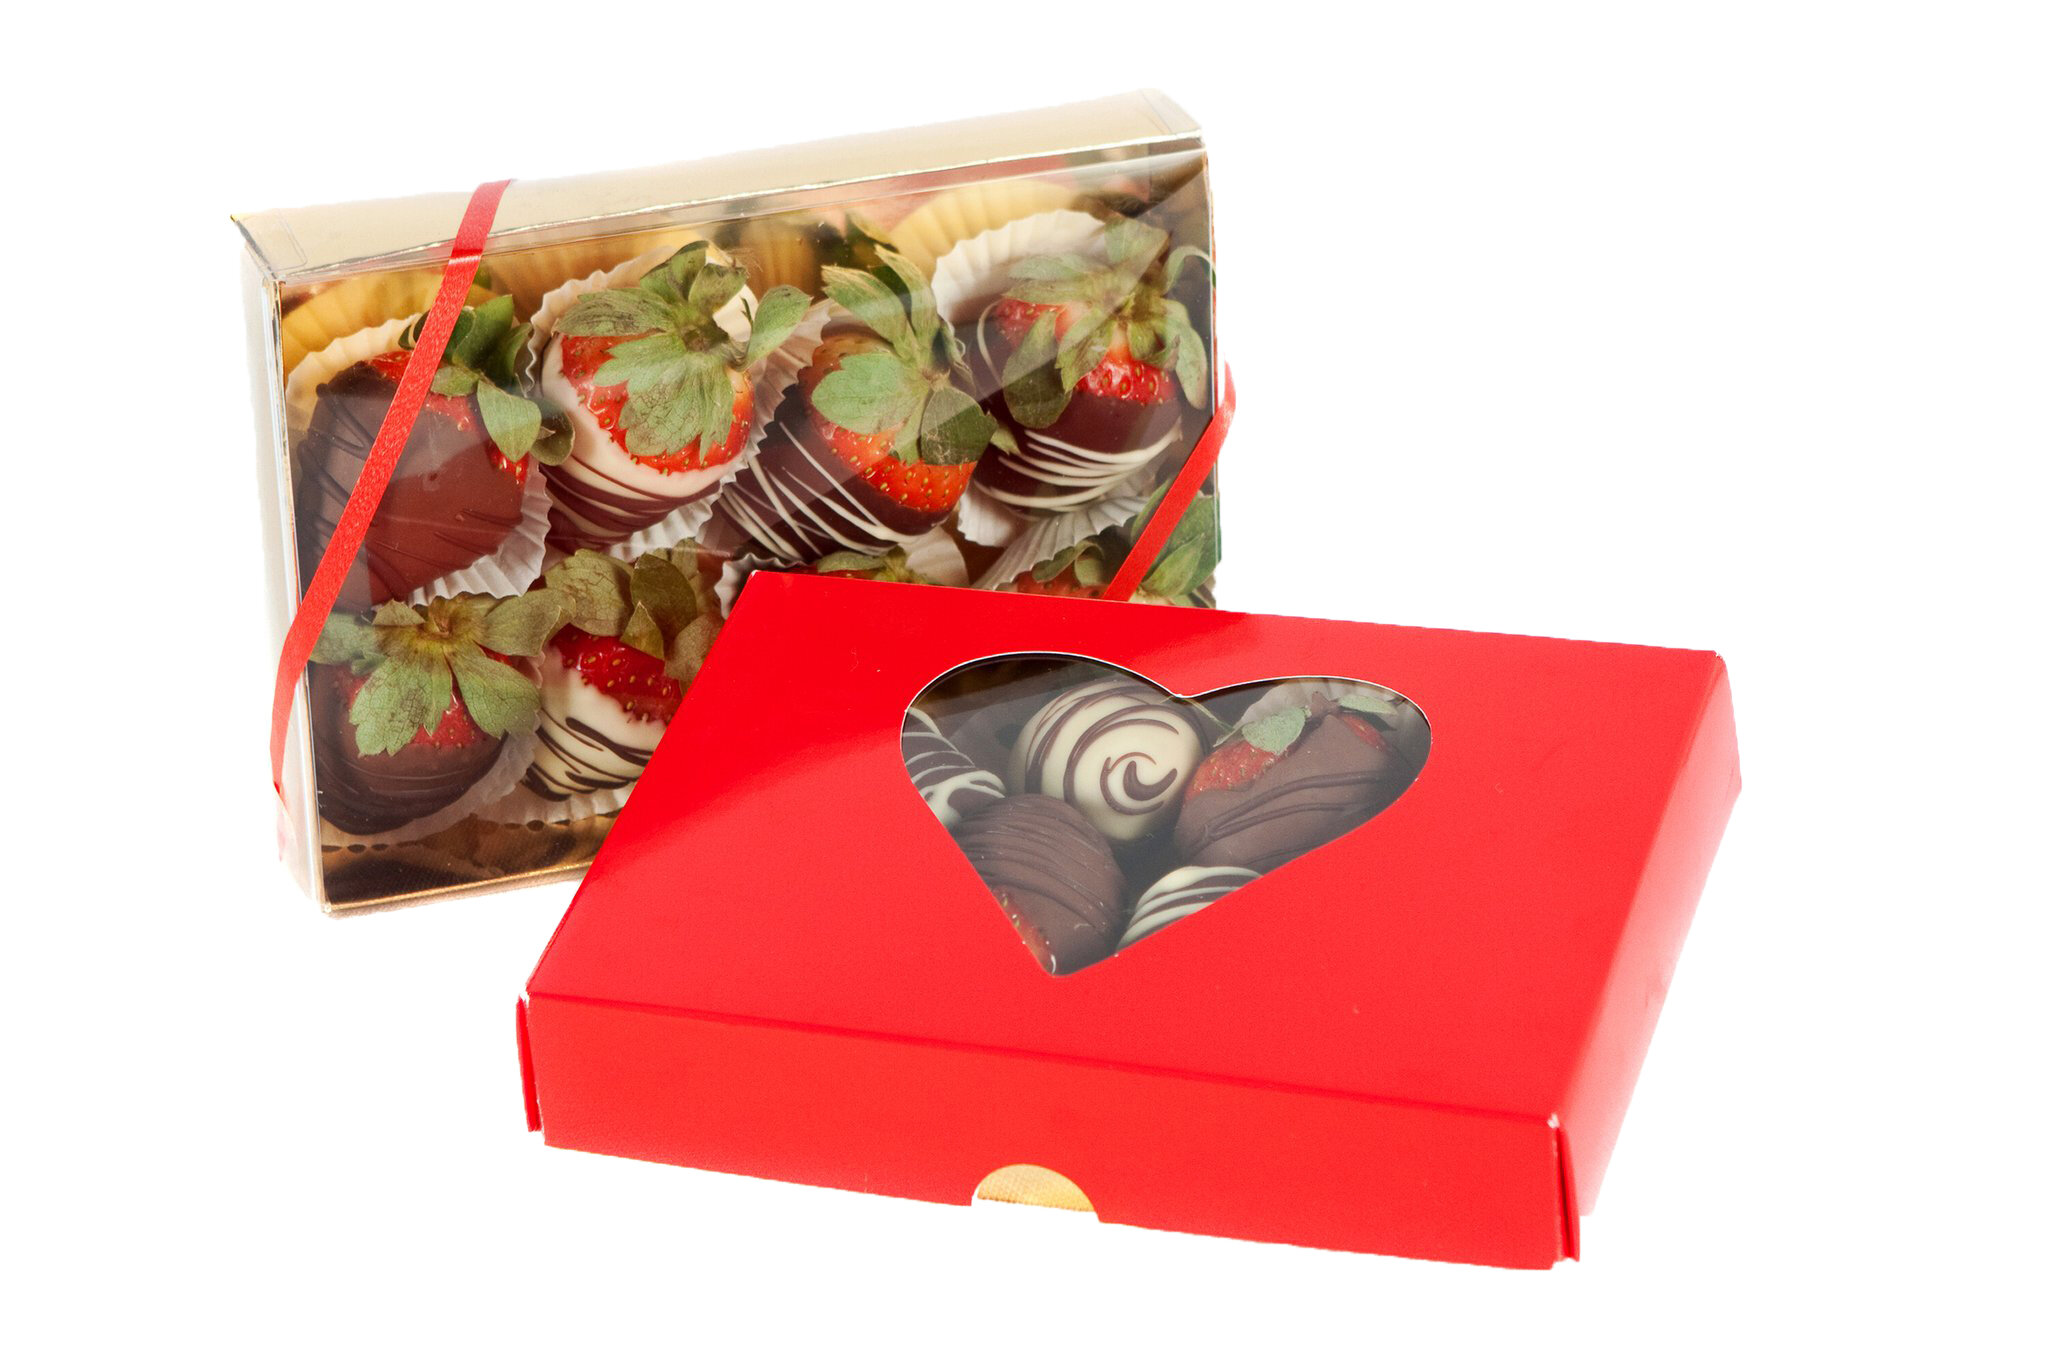 Valantines strawberry gift boxes by fruity bouquets.jpg